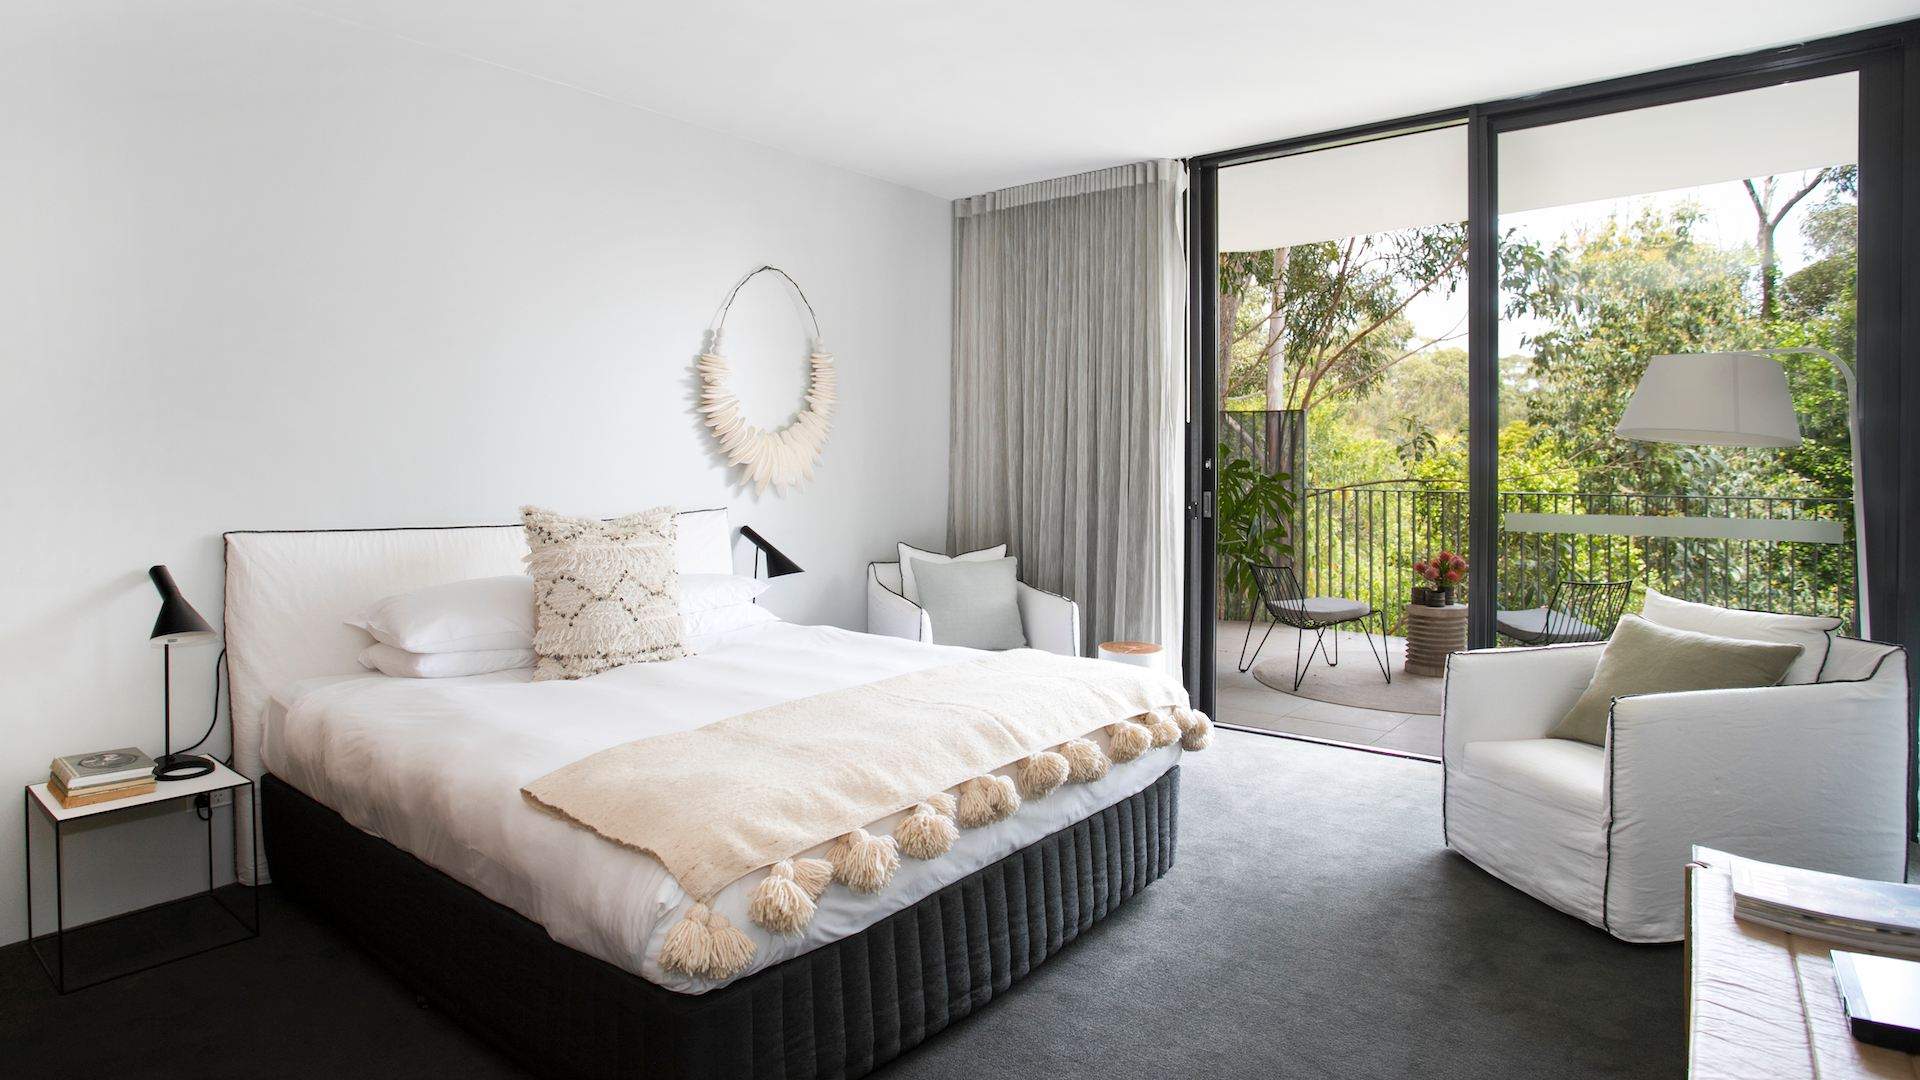 We're Giving Away a Luxury Getaway at Bannisters Pavilion Mollymook